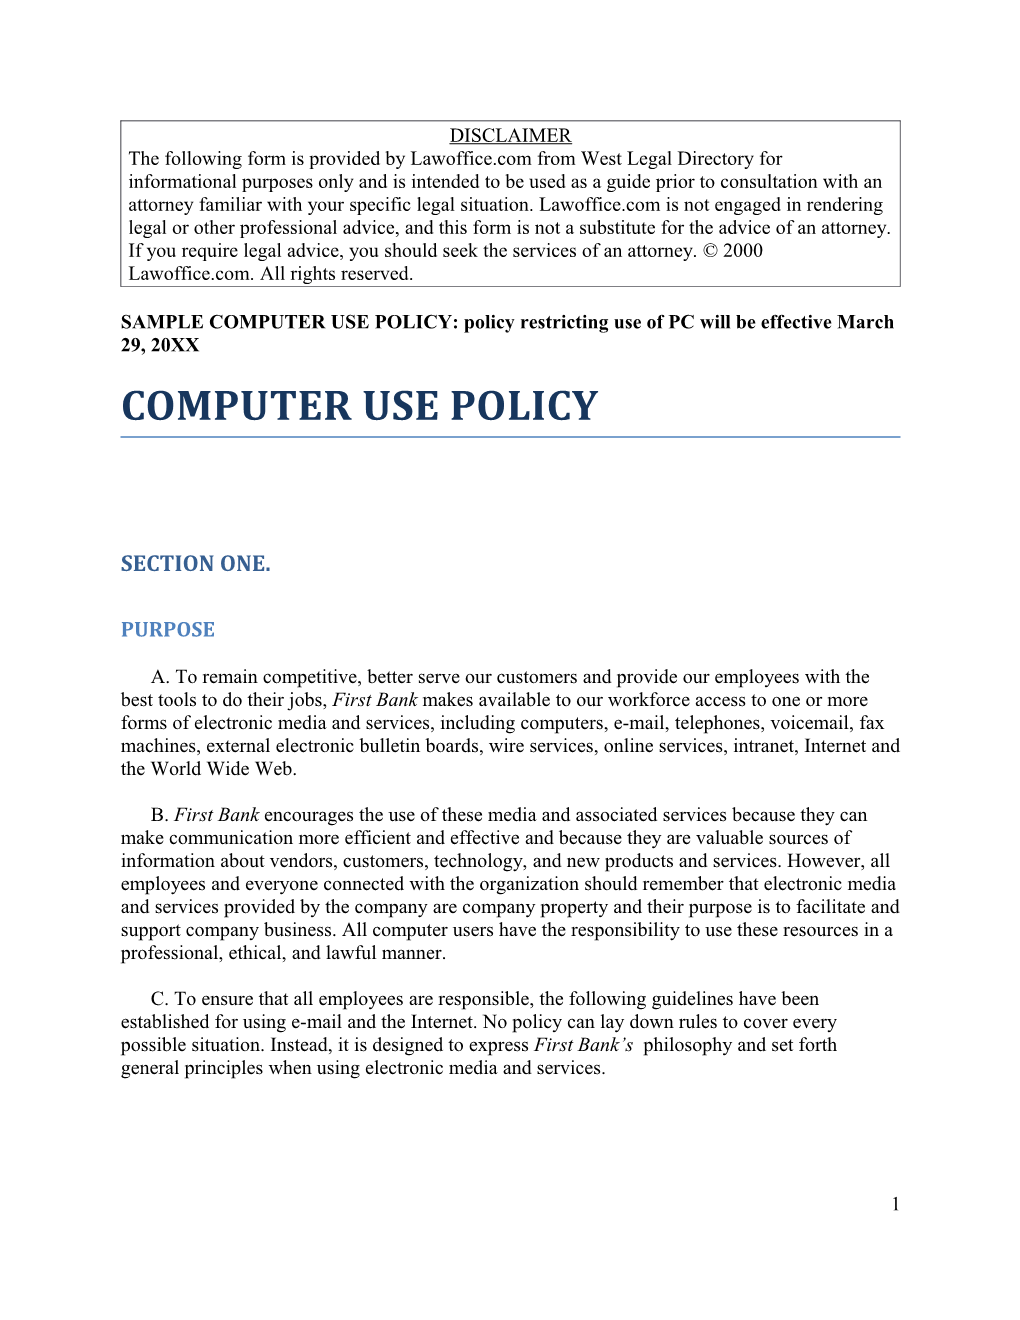 SAMPLE COMPUTER USE POLICY: Policy Restricting Use of PC Will Be Effective March 29, 20XX